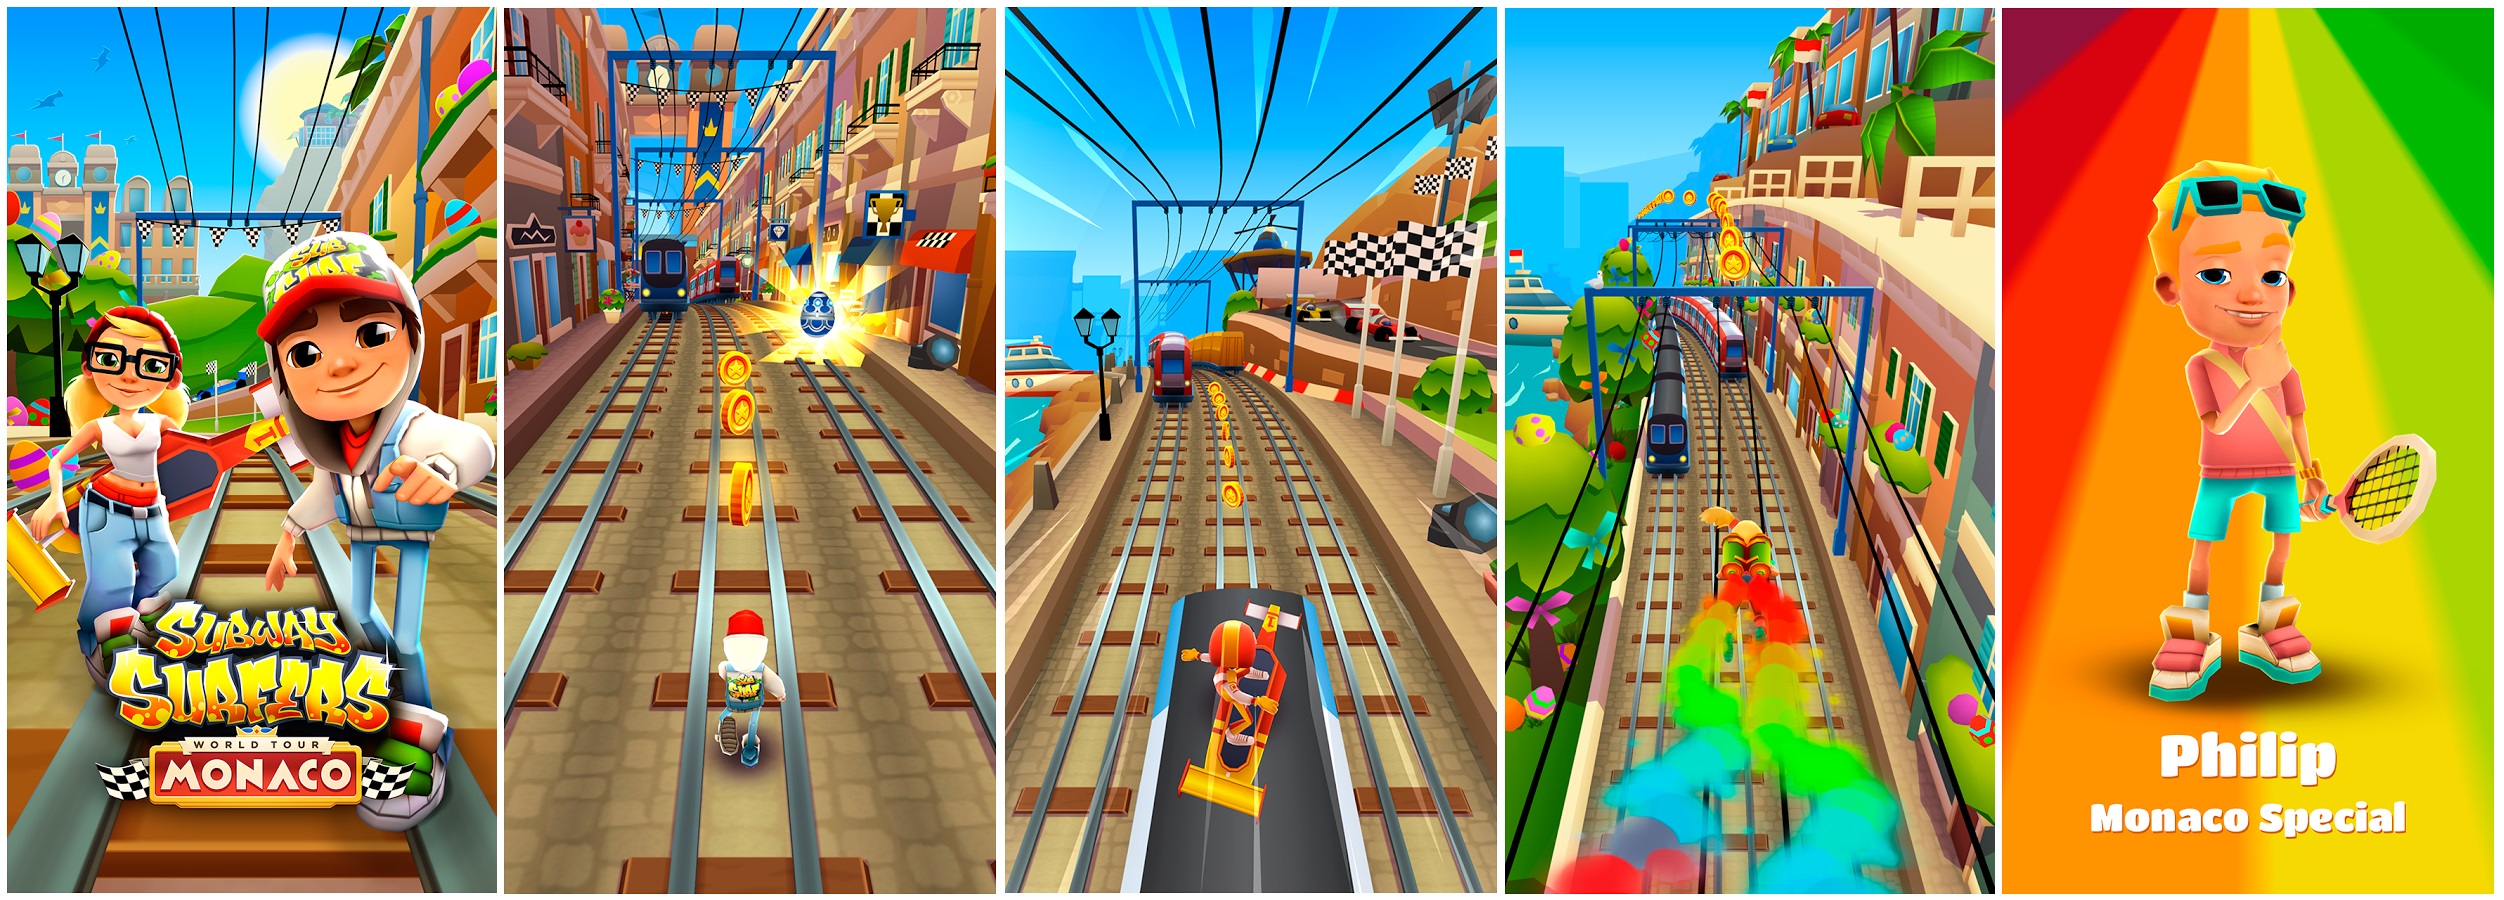 Download Subway Surfers Hacked Version For Android browngulf